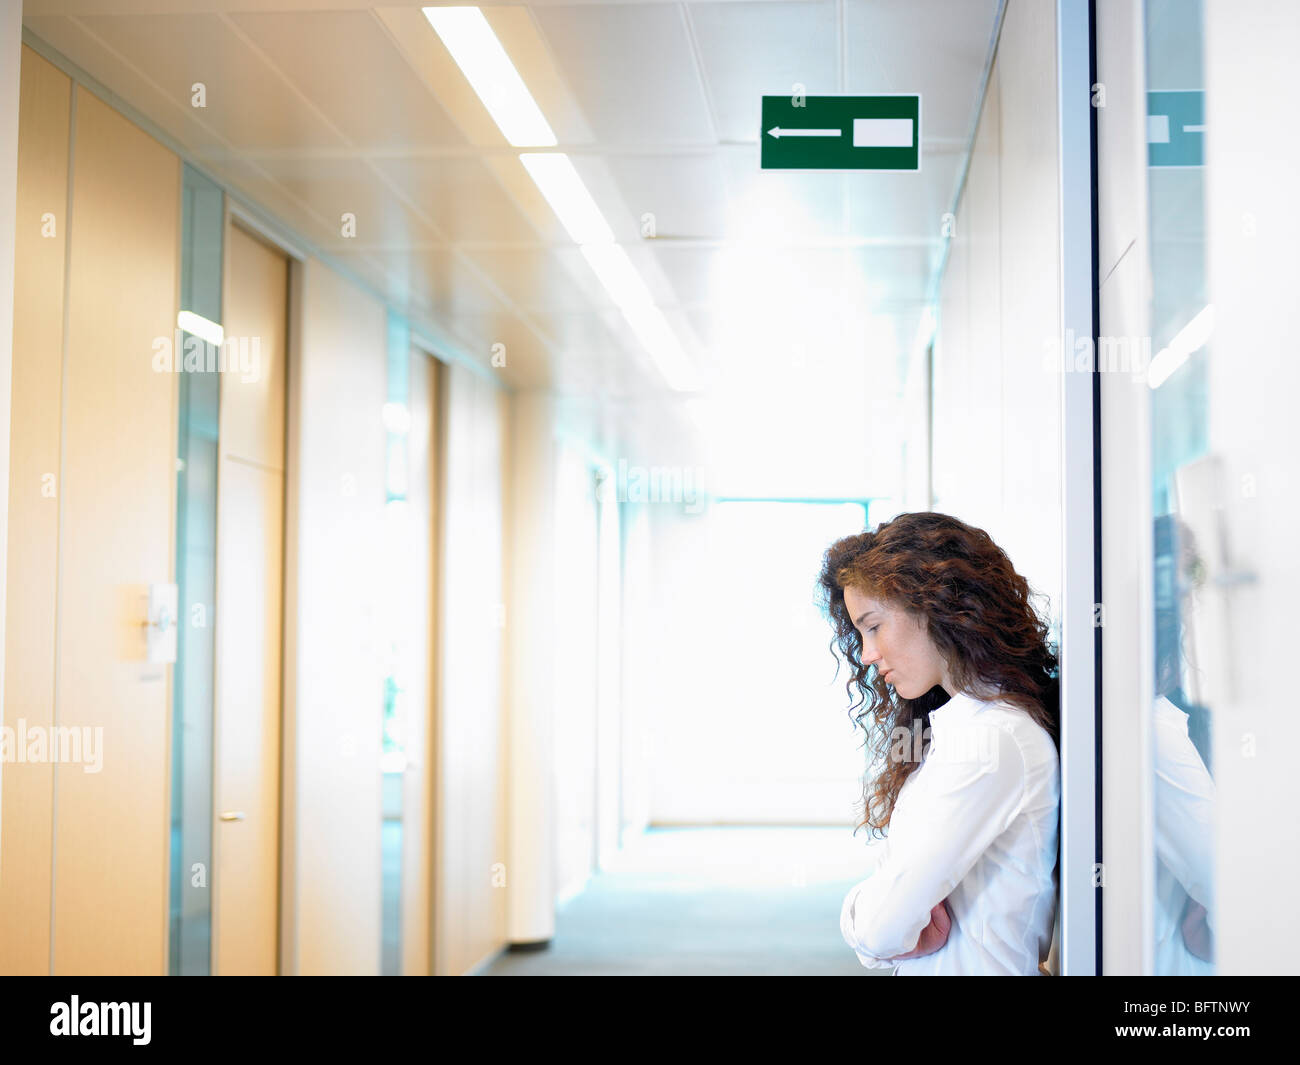 Business woman against the wall Stock Photo